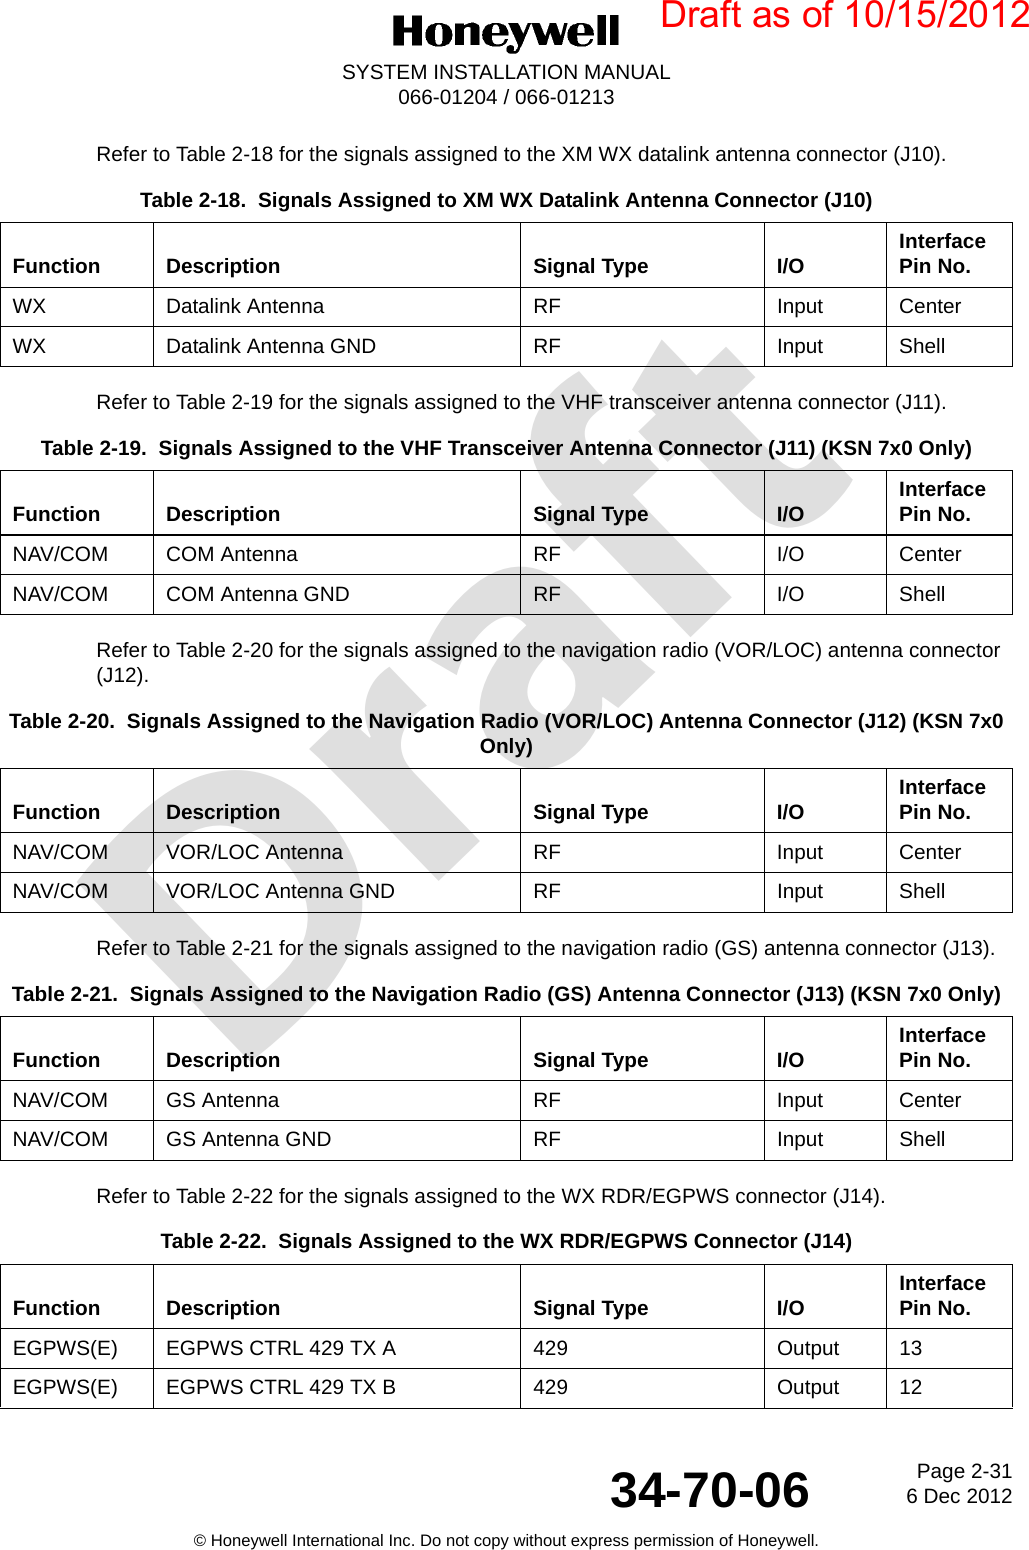 DraftPage 2-316 Dec 201234-70-06SYSTEM INSTALLATION MANUAL066-01204 / 066-01213© Honeywell International Inc. Do not copy without express permission of Honeywell.Refer to Table 2-18 for the signals assigned to the XM WX datalink antenna connector (J10).Refer to Table 2-19 for the signals assigned to the VHF transceiver antenna connector (J11).Refer to Table 2-20 for the signals assigned to the navigation radio (VOR/LOC) antenna connector (J12).Refer to Table 2-21 for the signals assigned to the navigation radio (GS) antenna connector (J13).Refer to Table 2-22 for the signals assigned to the WX RDR/EGPWS connector (J14).Table 2-18.  Signals Assigned to XM WX Datalink Antenna Connector (J10) Function Description Signal Type I/O Interface Pin No.WX Datalink Antenna RF Input CenterWX Datalink Antenna GND RF Input ShellTable 2-19.  Signals Assigned to the VHF Transceiver Antenna Connector (J11) (KSN 7x0 Only) Function Description Signal Type I/O Interface Pin No.NAV/COM COM Antenna RF I/O CenterNAV/COM COM Antenna GND RF I/O ShellTable 2-20.  Signals Assigned to the Navigation Radio (VOR/LOC) Antenna Connector (J12) (KSN 7x0 Only) Function Description Signal Type I/O Interface Pin No.NAV/COM VOR/LOC Antenna RF Input CenterNAV/COM VOR/LOC Antenna GND RF Input ShellTable 2-21.  Signals Assigned to the Navigation Radio (GS) Antenna Connector (J13) (KSN 7x0 Only) Function Description Signal Type I/O Interface Pin No.NAV/COM GS Antenna RF Input CenterNAV/COM GS Antenna GND RF Input ShellTable 2-22.  Signals Assigned to the WX RDR/EGPWS Connector (J14) Function Description Signal Type I/O Interface Pin No.EGPWS(E) EGPWS CTRL 429 TX A 429 Output 13EGPWS(E) EGPWS CTRL 429 TX B 429 Output 12Draft as of 10/15/2012